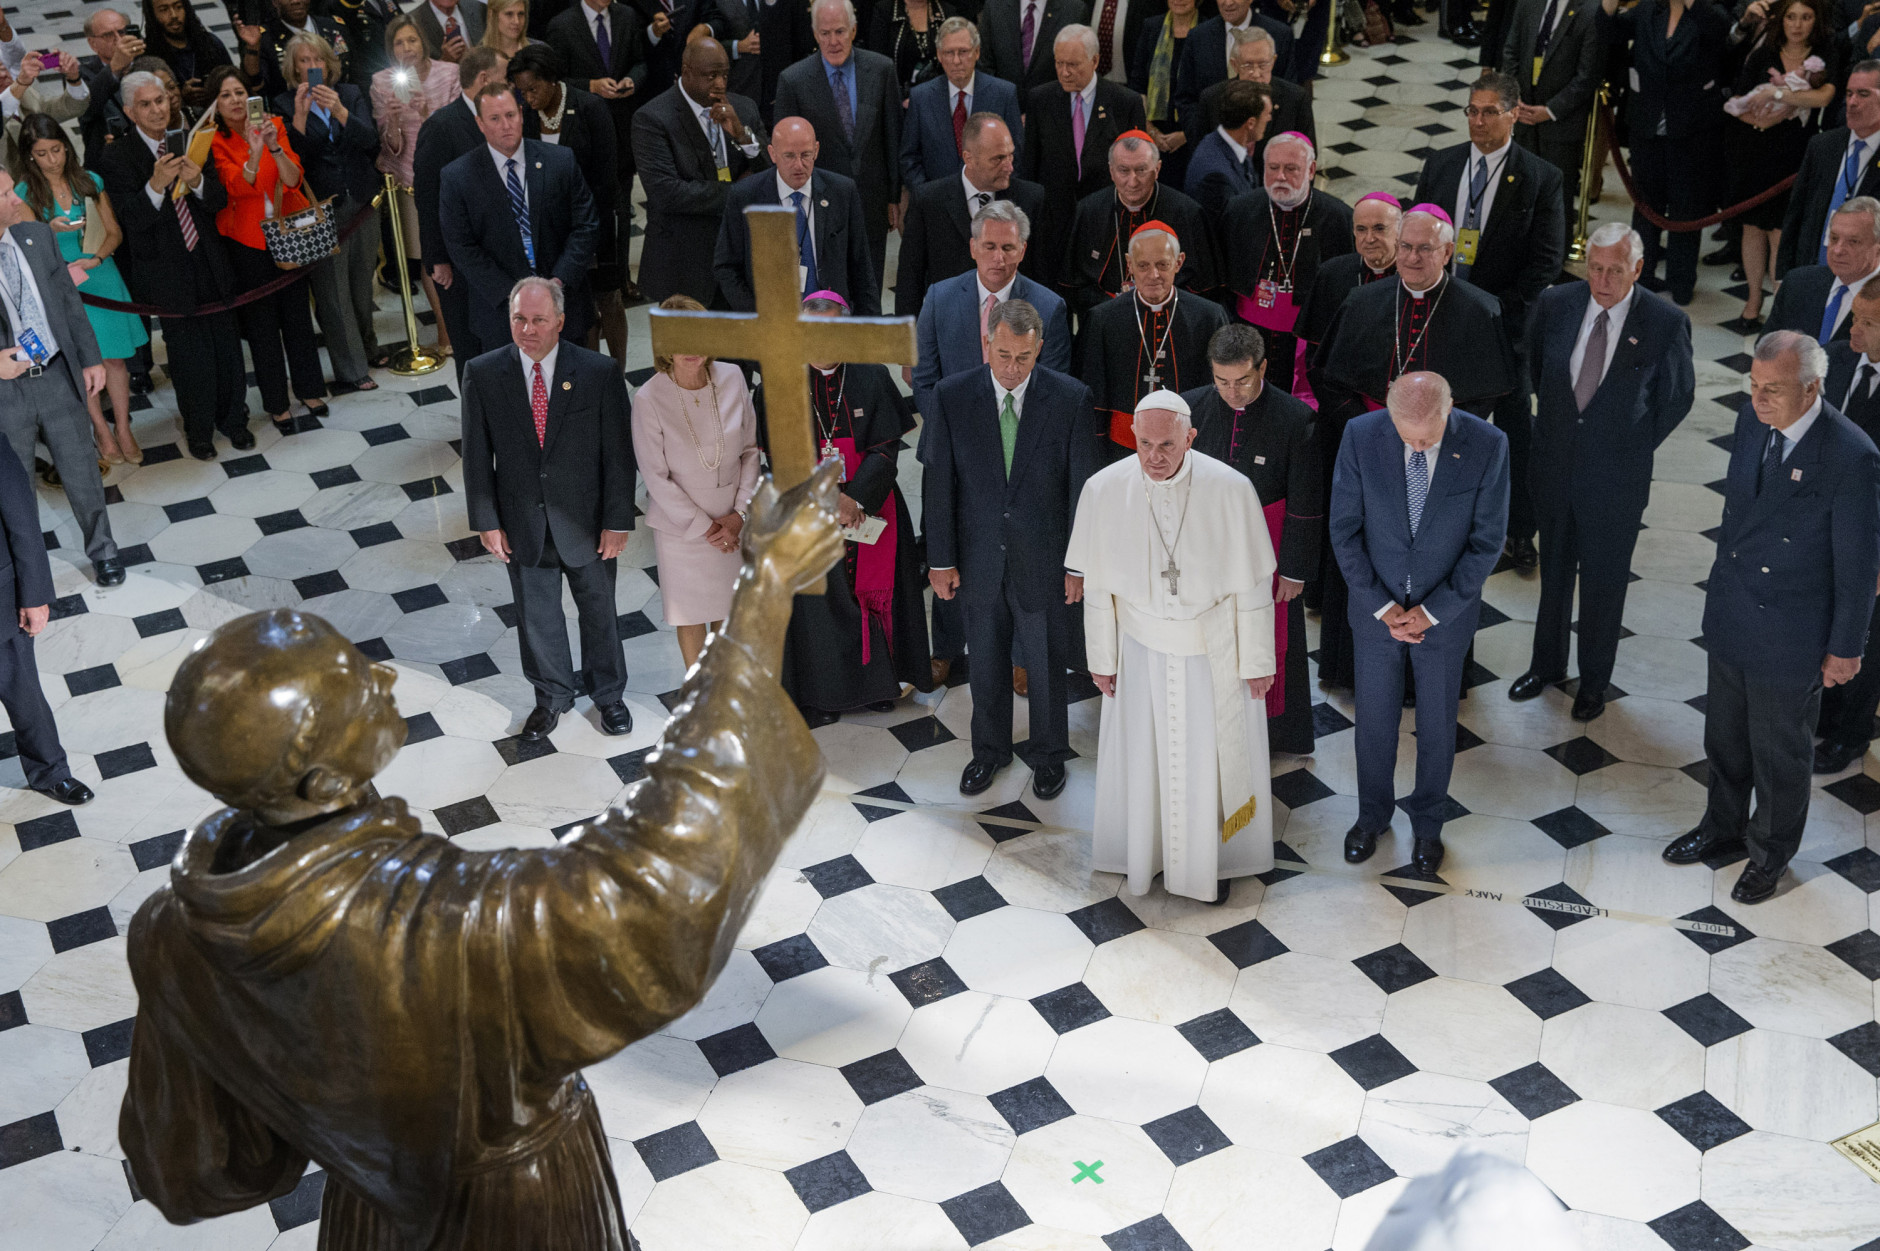 Pope Francis (Front C) pauses in front of a sculpture of Spanish-born Junipero Serra, the Franciscan Friar known for starting missions in California, in Statuary Hall at the U.S. Capitol in Washington DC, USA, 24 September 2015. Pope Francis is on a five-day trip to the USA, which includes stops in Washington DC, New York and Philadelphia, after a three-day stay in Cuba. Pope Francis added the Cuba visit after helping broker a historic rapprochement between Washington and Havana that ended a diplomatic freeze of more than 50 years.